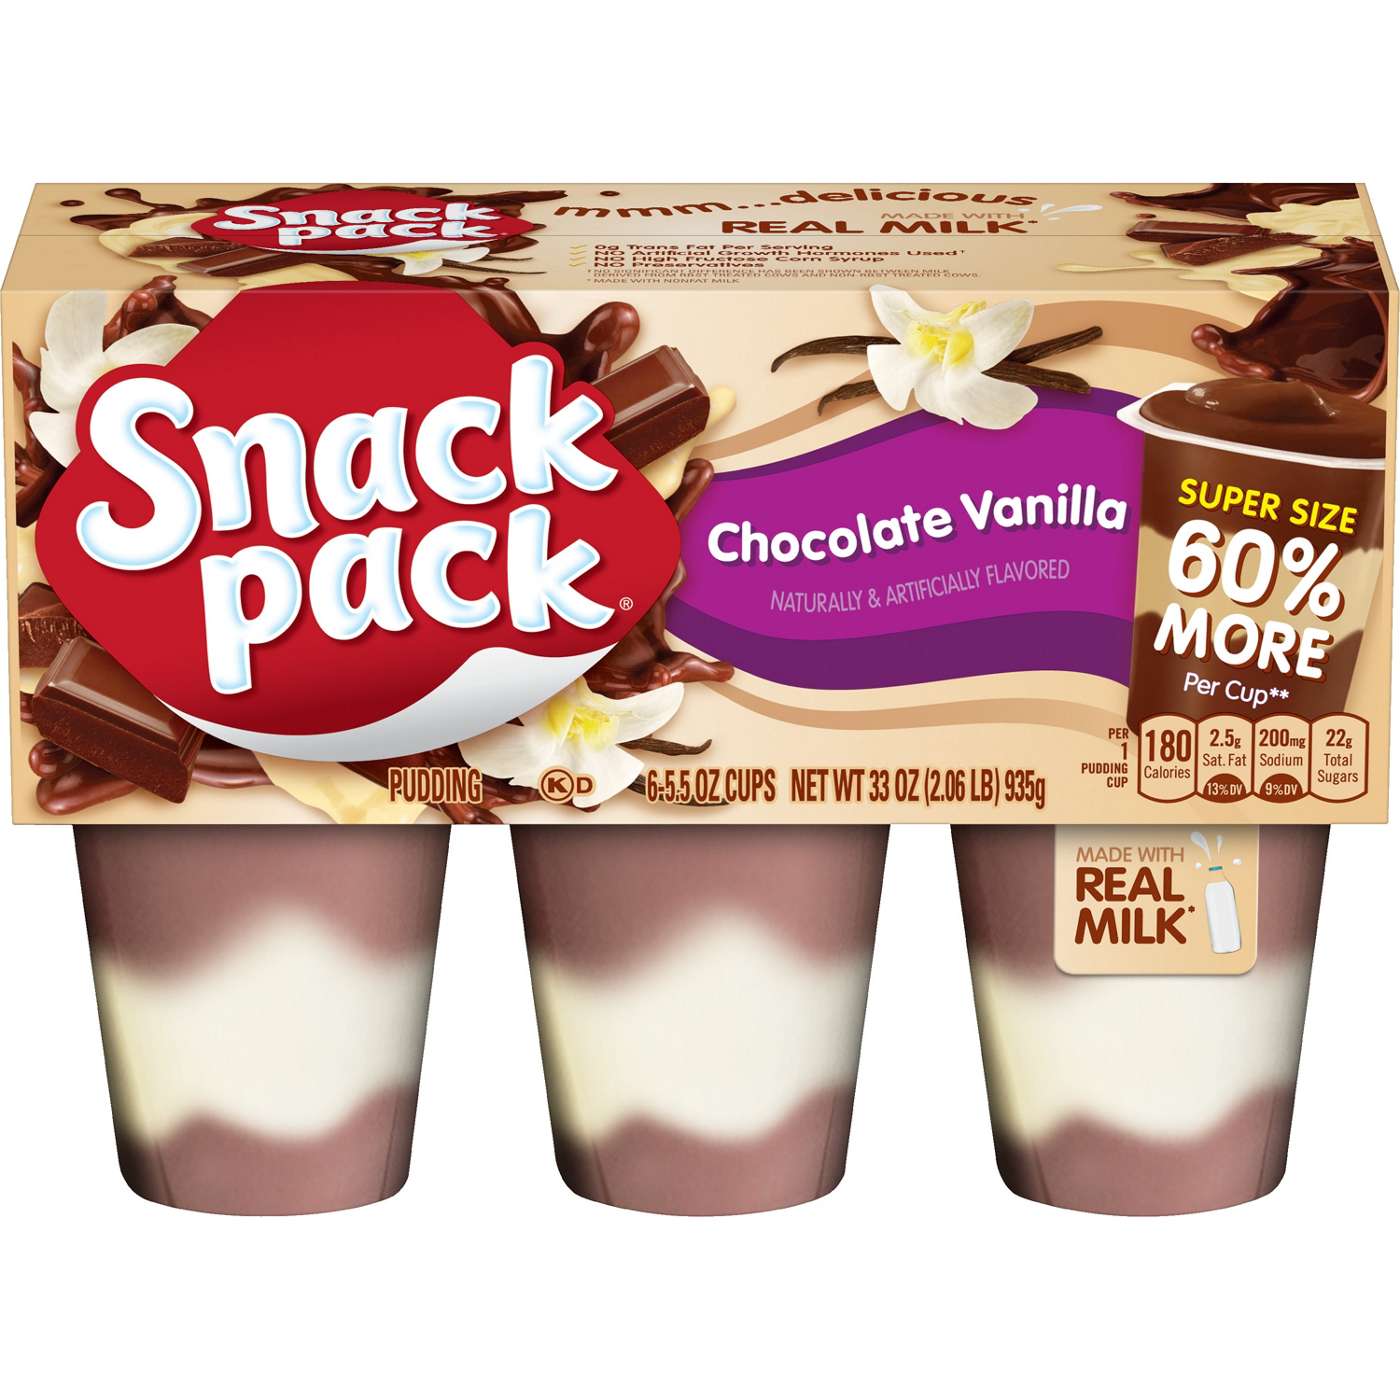 Snack Pack Super Size Chocolate Vanilla Pudding Cups; image 1 of 7